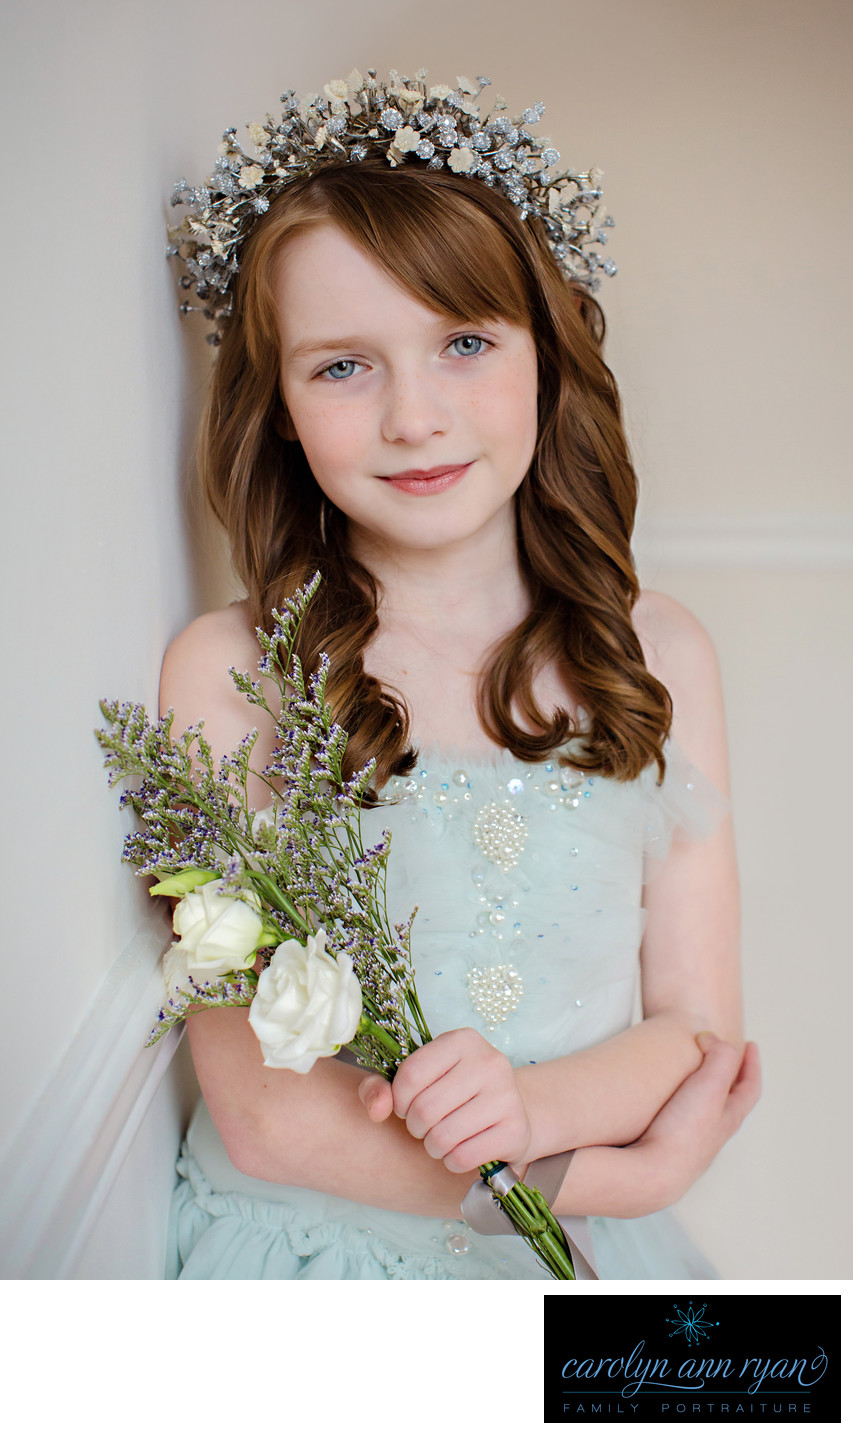 Best Child Portraits in Charlotte NC